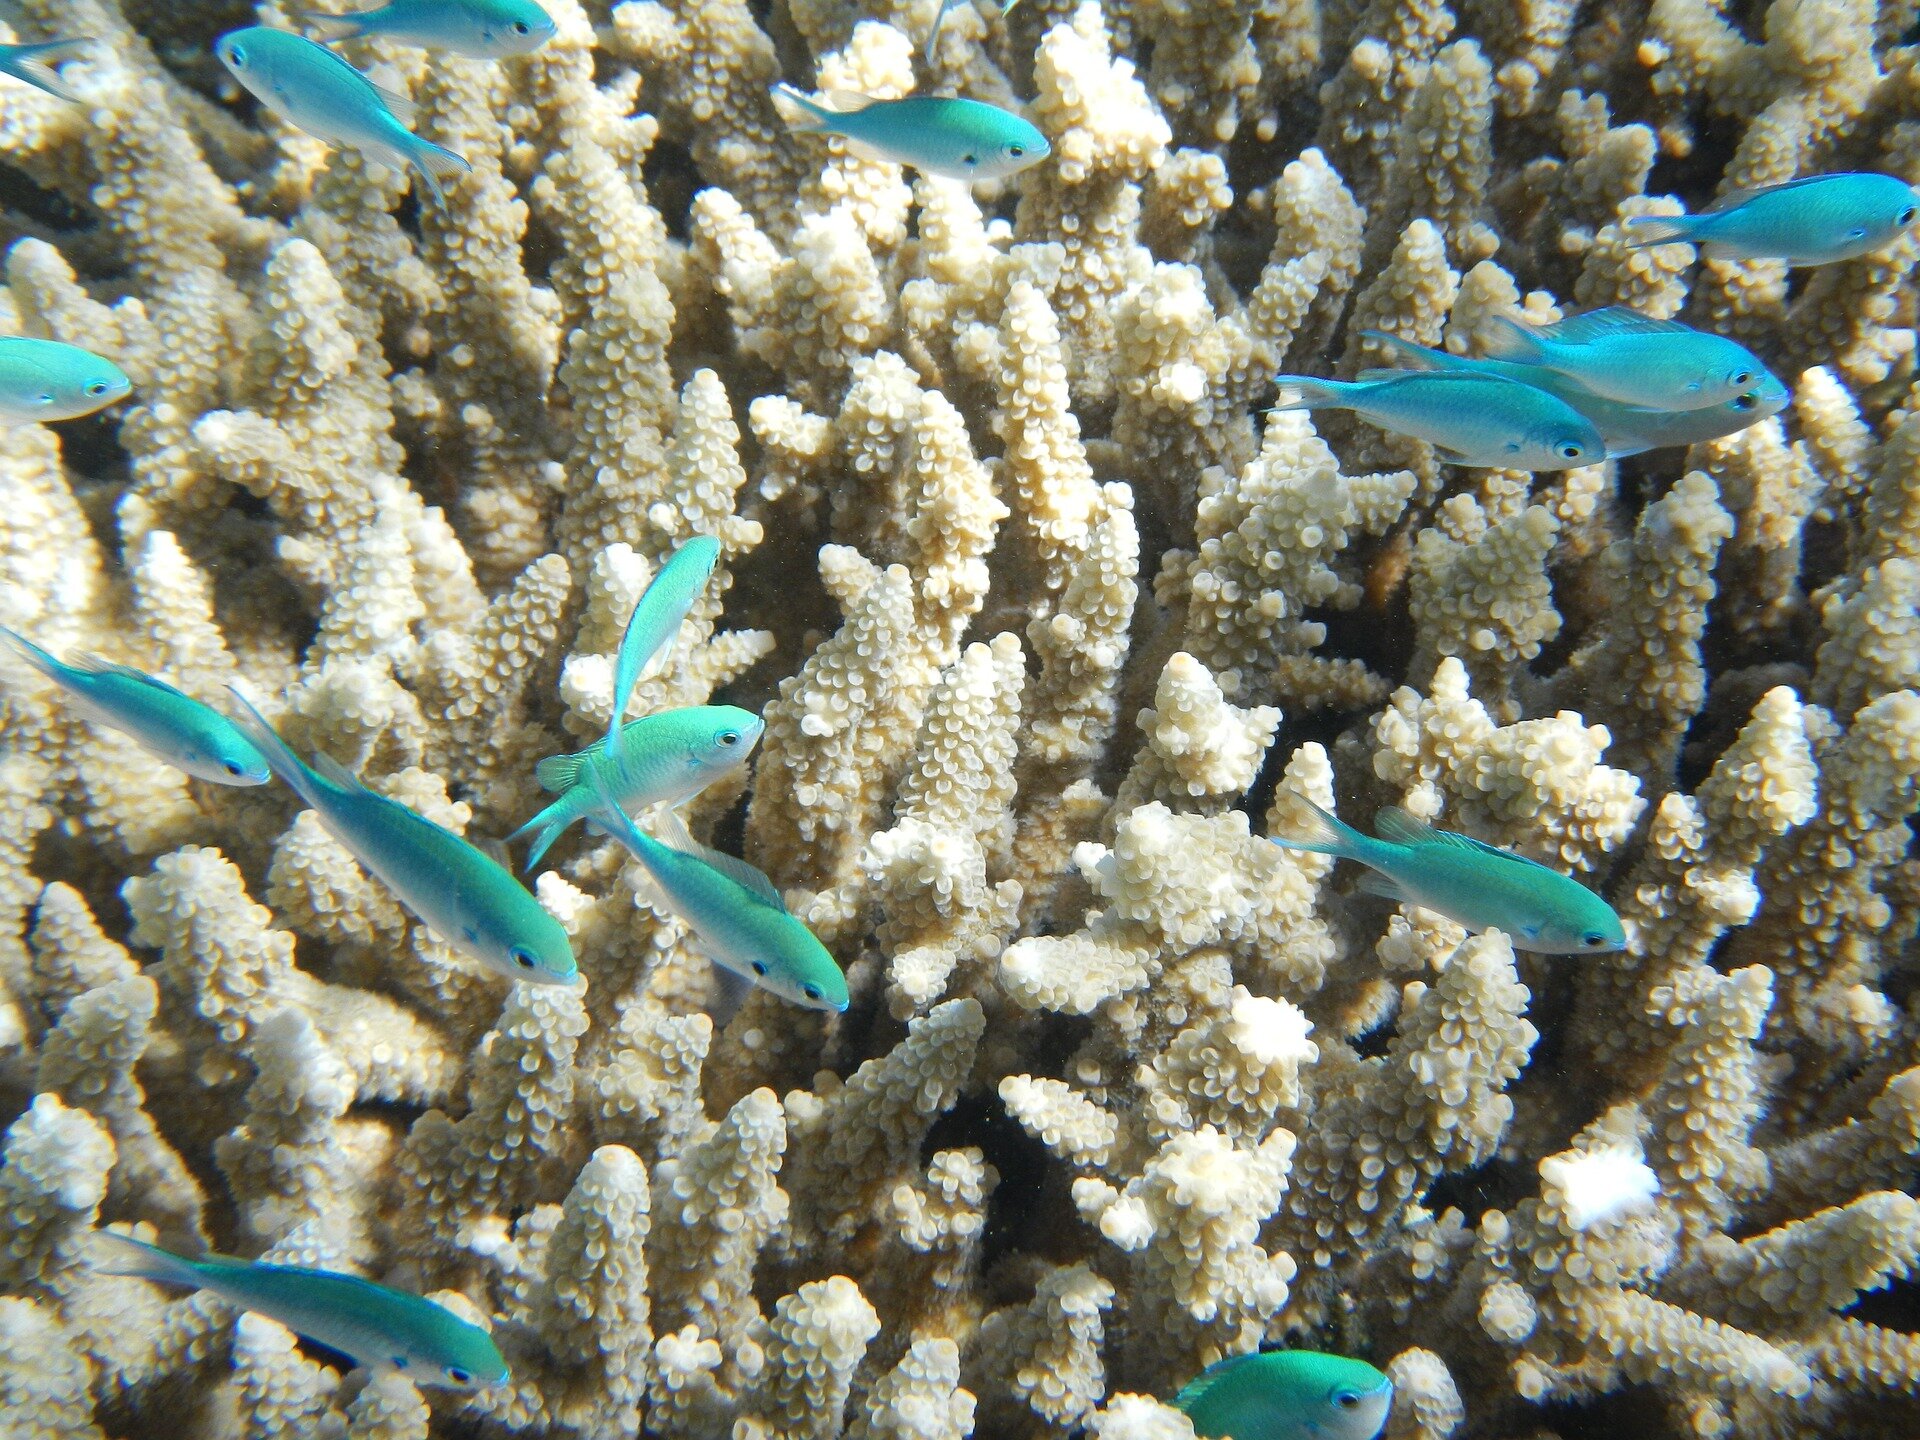 Adult coral can handle more heat and keep growing thanks to heat-evolved symbionts